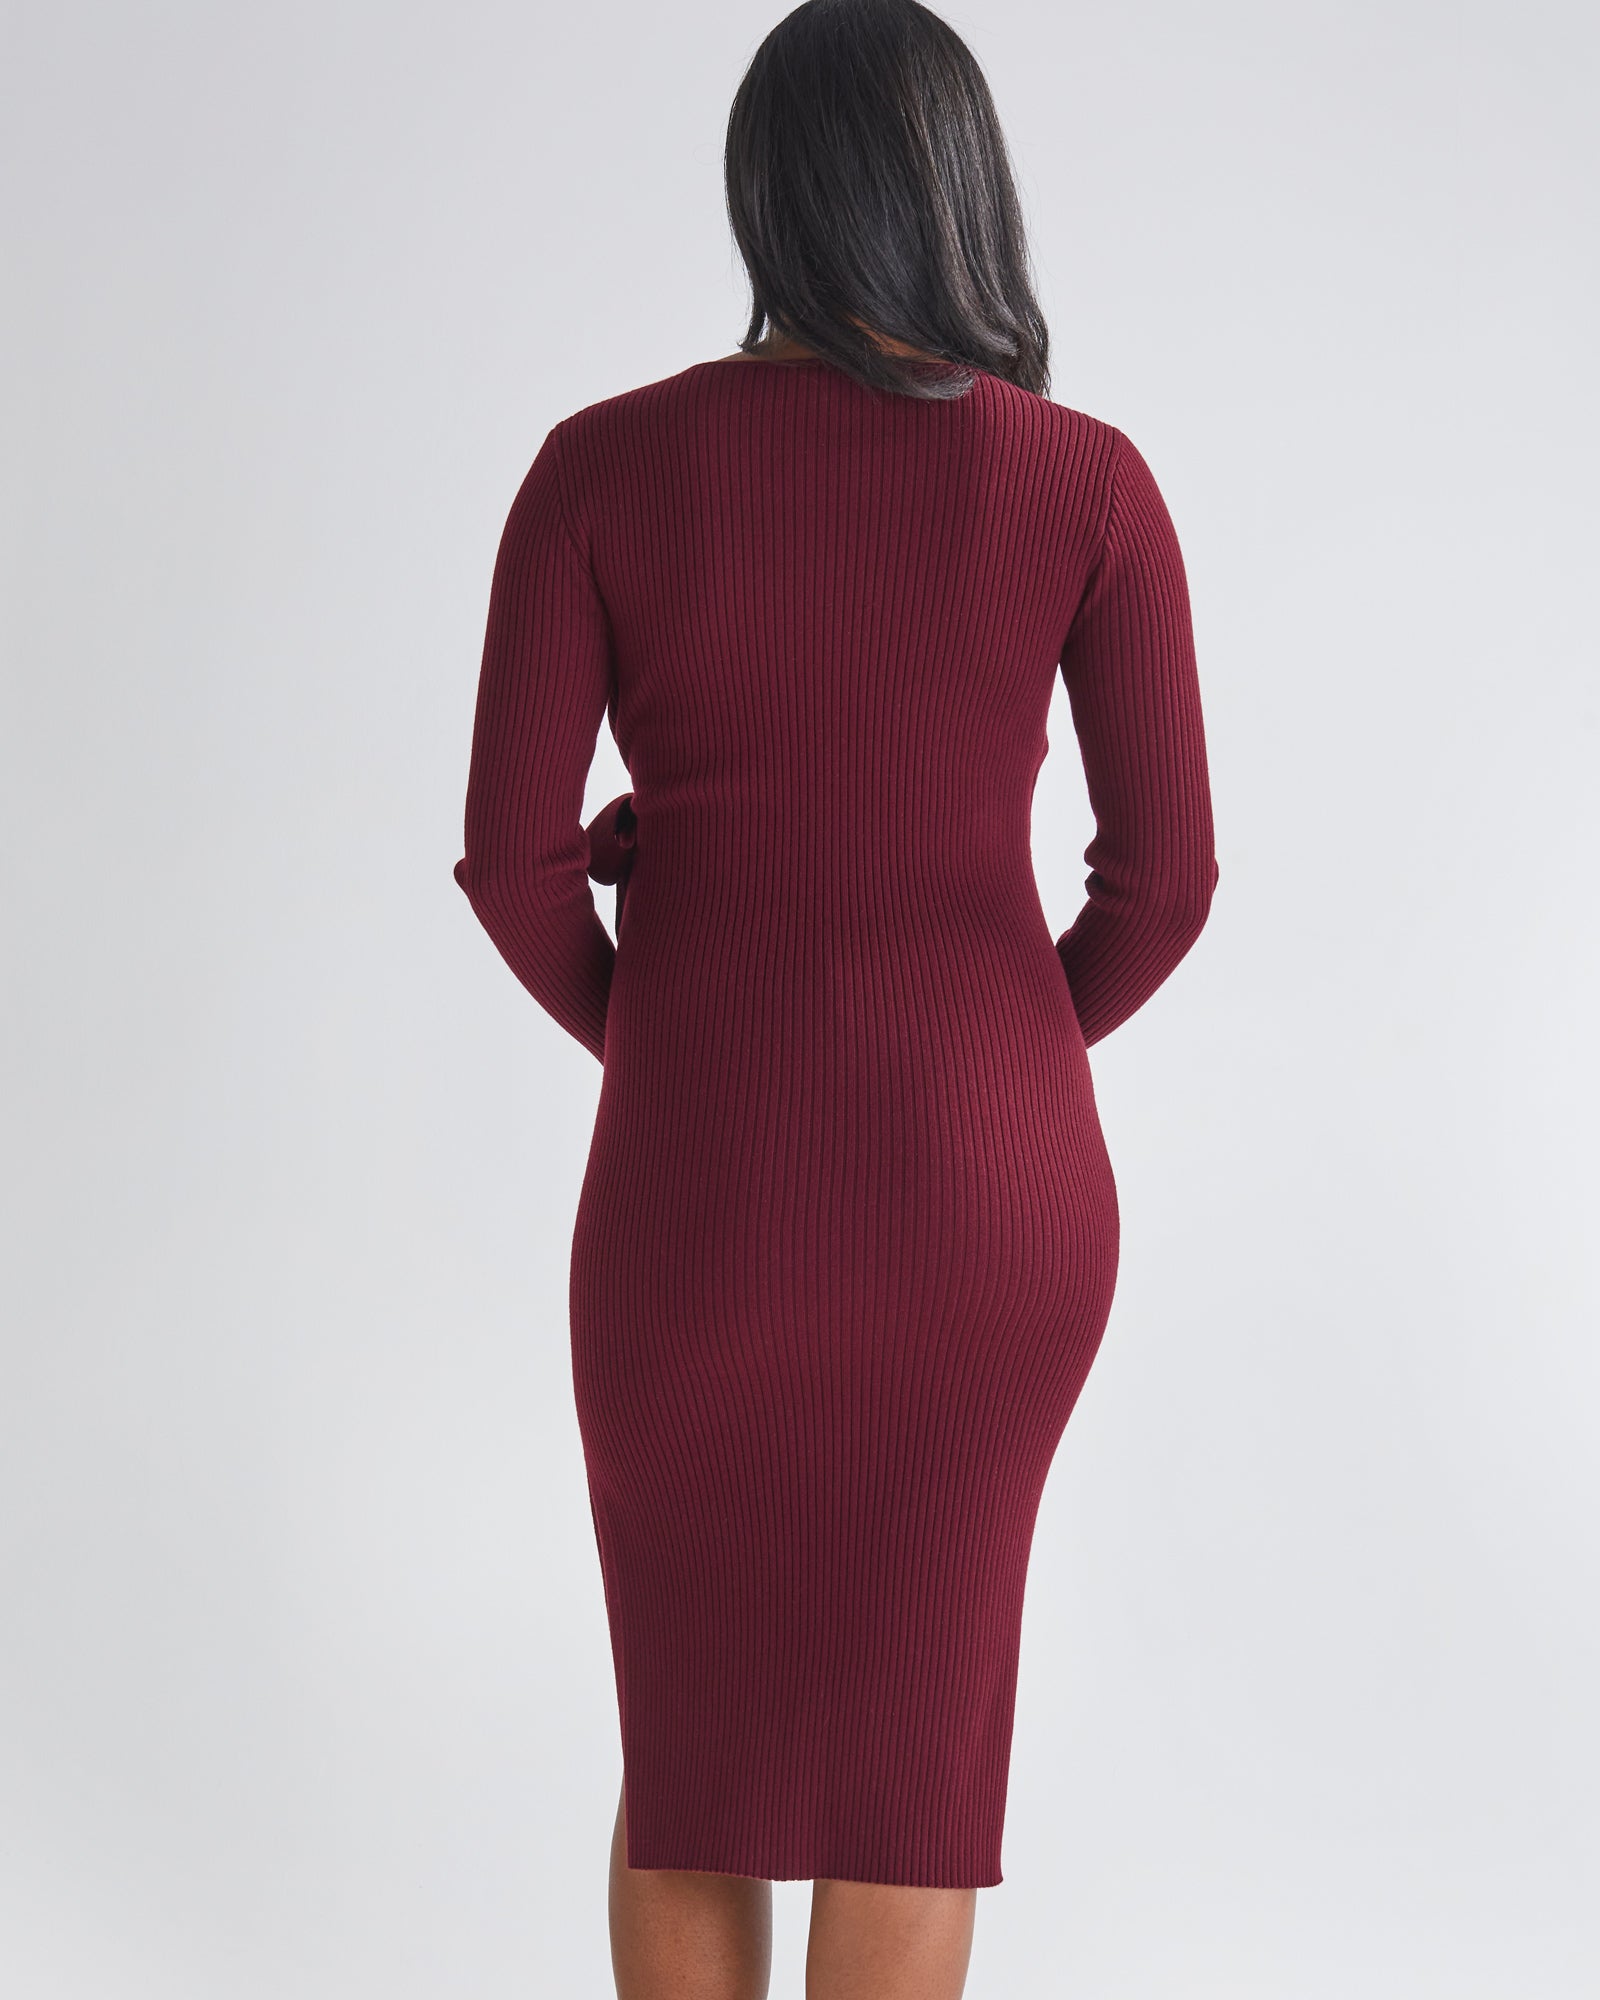 Back View - A Pregnannt Woman Wearing Lucille Full Sleeve Knit Maternity Midi Dress in Burgundy  from Angel Maternity.